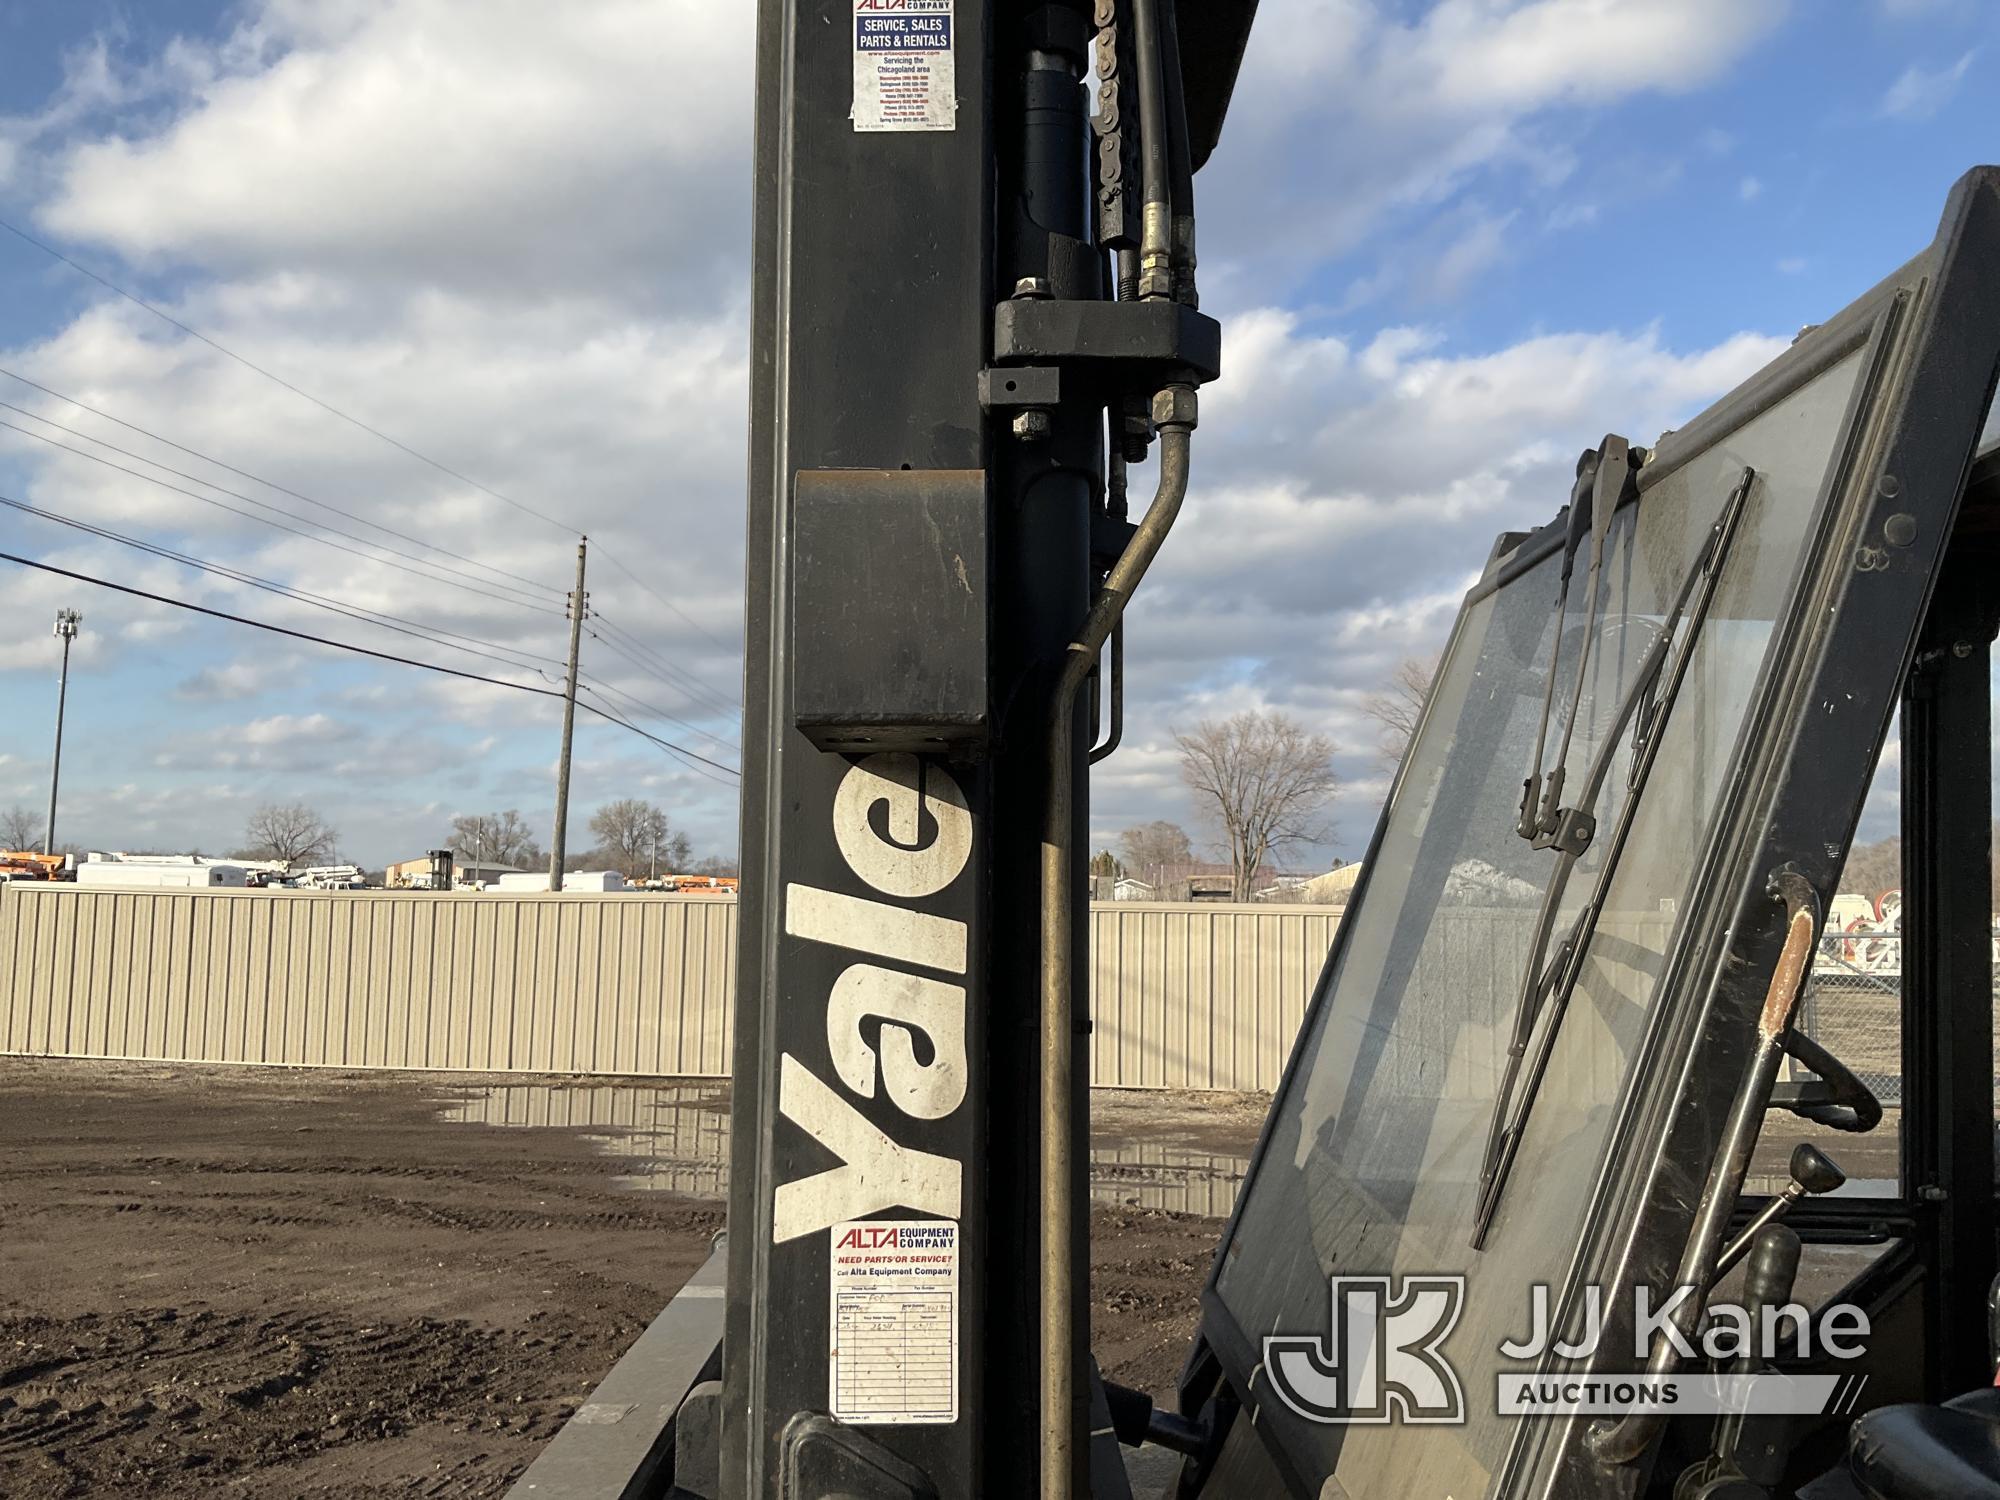 (South Beloit, IL) 2005 Yale GLP155 Solid Tired Forklift Runs, Moves, Operates) (Left Door Does Not